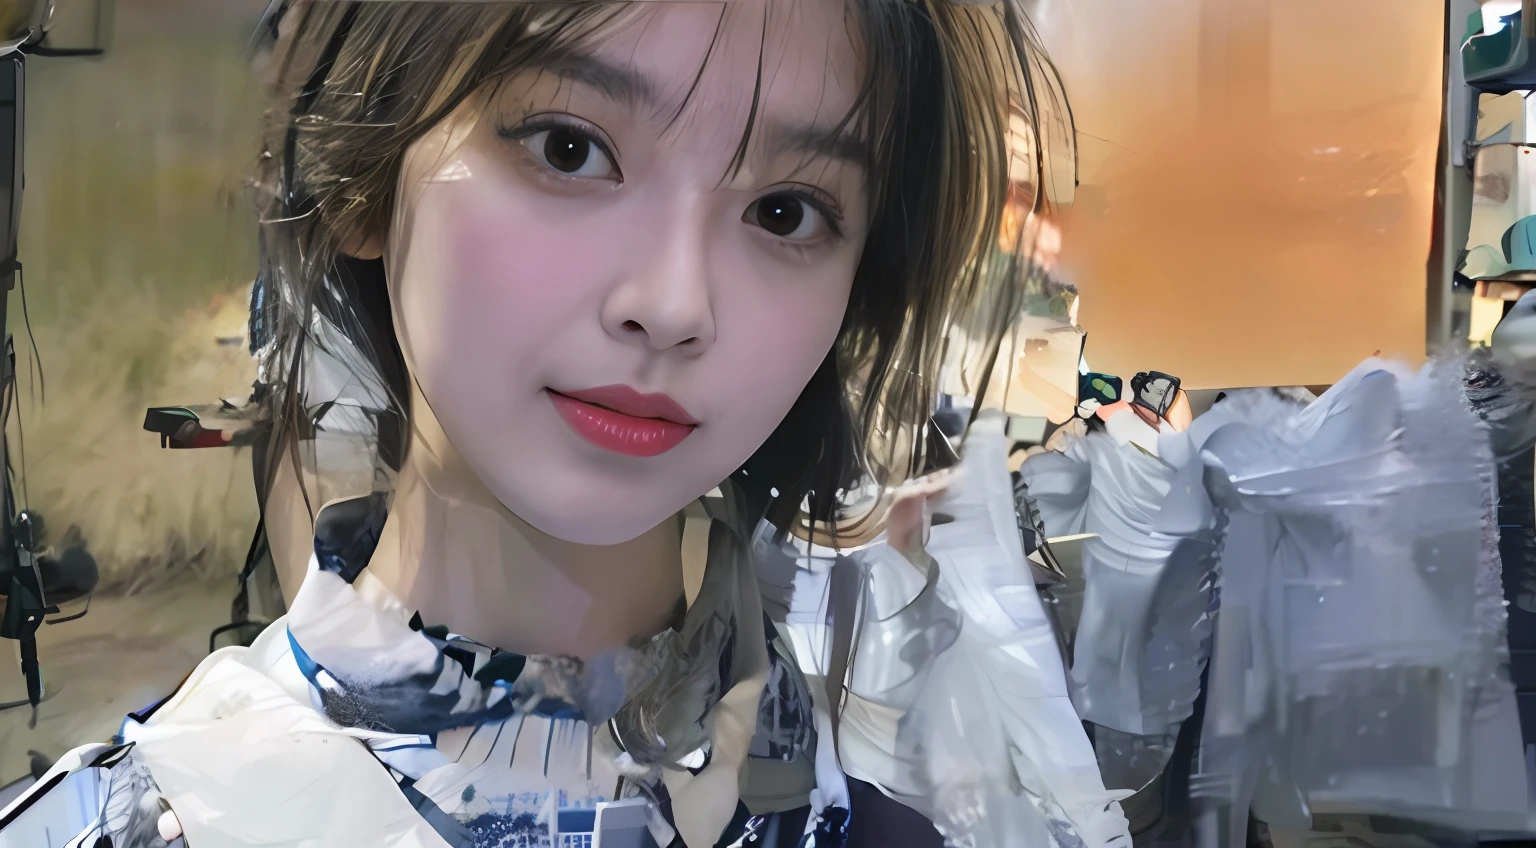 There is a messy hair，woman in dress, ulzzangs, Shin Jinying, 8k selfie photograph, [ Realistic photo ]!!, sakimichan, Guviz, gongbi, [ Realistic photography ], apples, inspired by Sim Sa-jeong, Photorealistic!!!!!!! Art style, jinyoung shin aesthetic, inspired by Ma Yuanyu